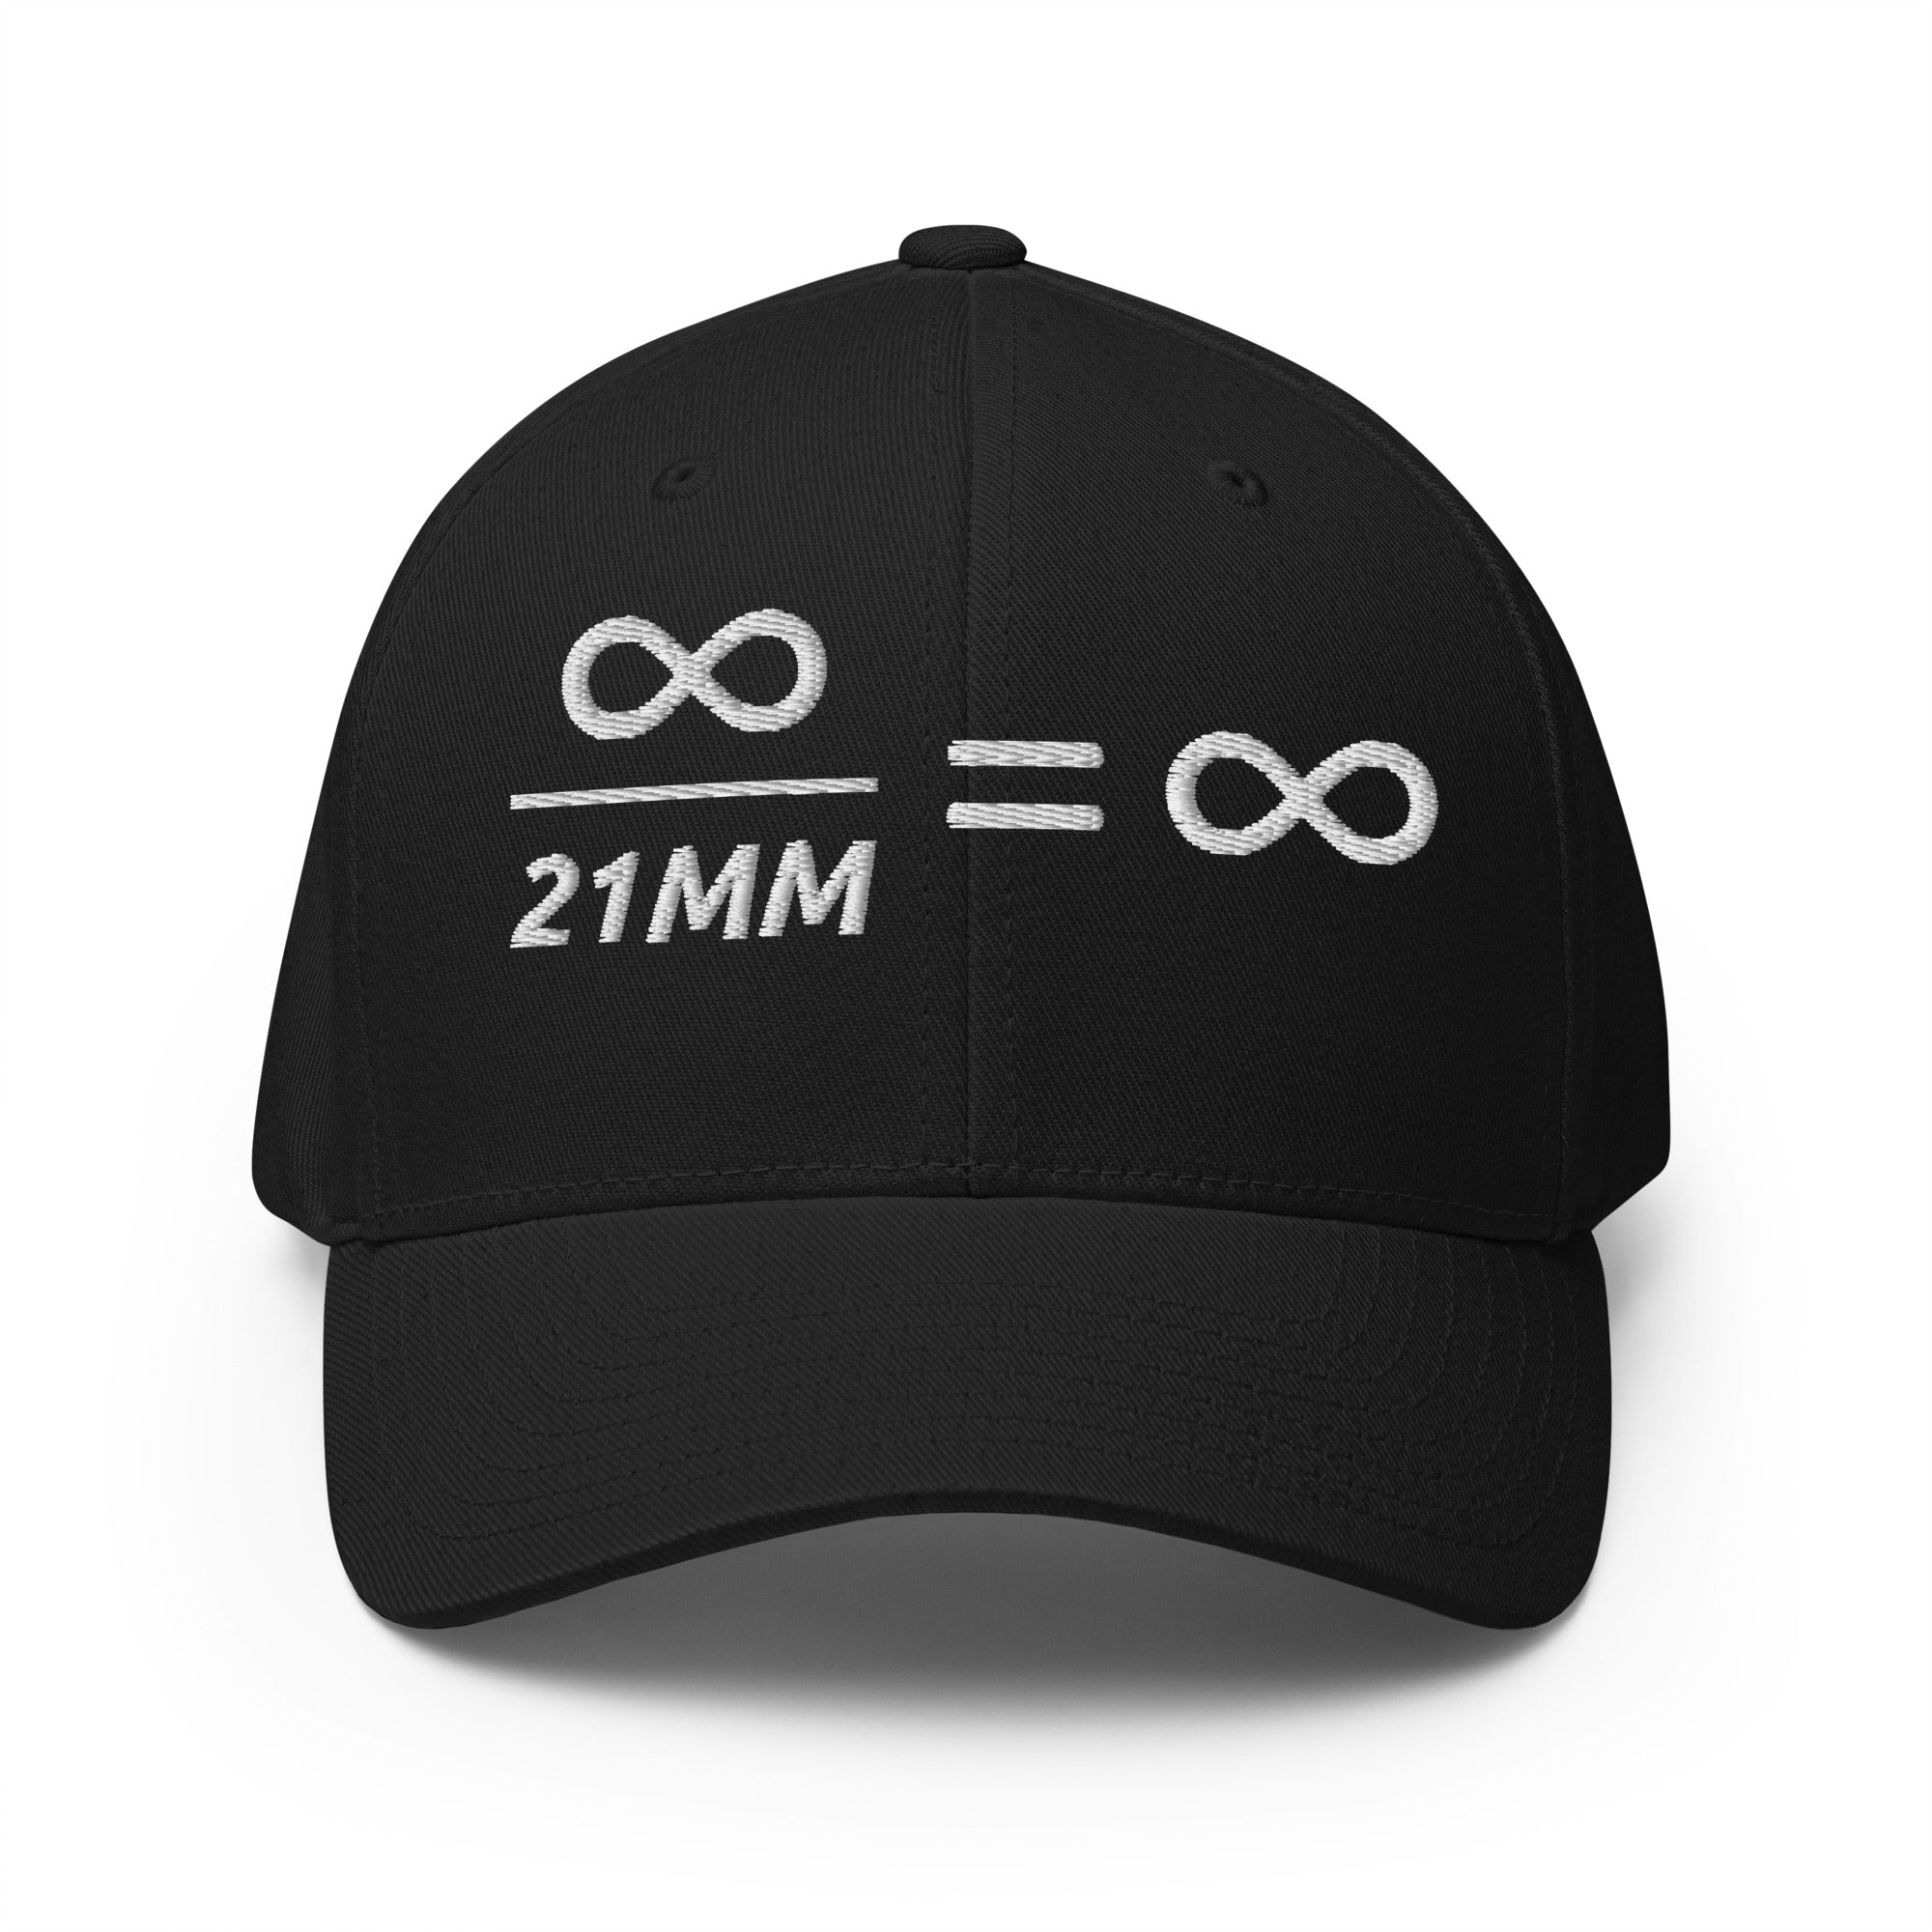 Bitcoin Hat - Infinity Divided By 21 Million - Bitcoin Merchandise - Brrr